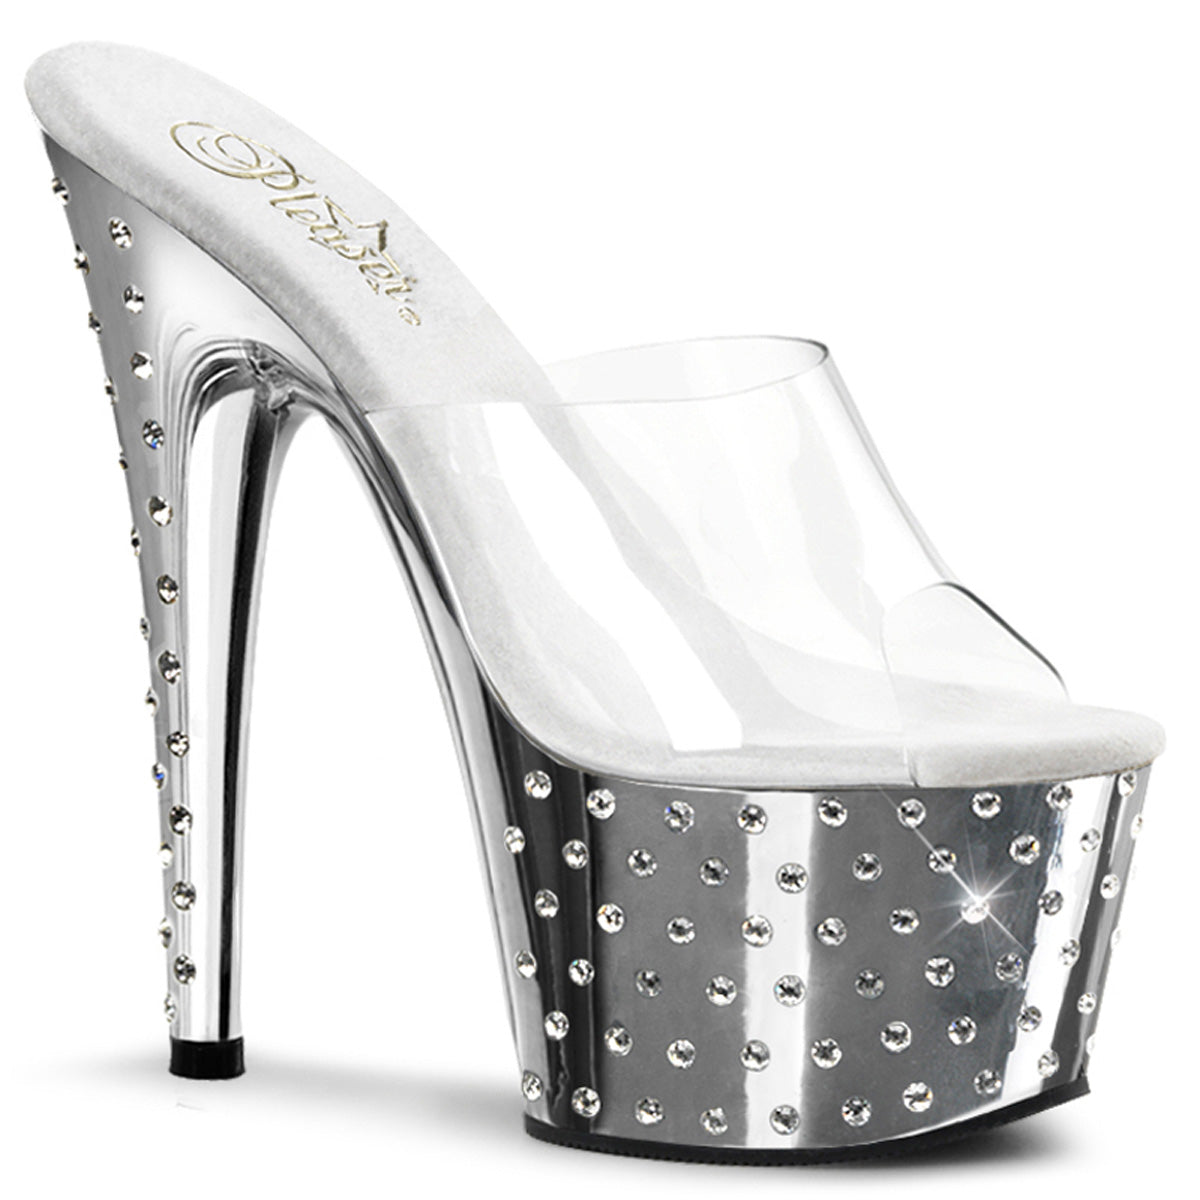 STARDUST-701 7 Inch Heel ClearSilver Chrome Strippers Shoes